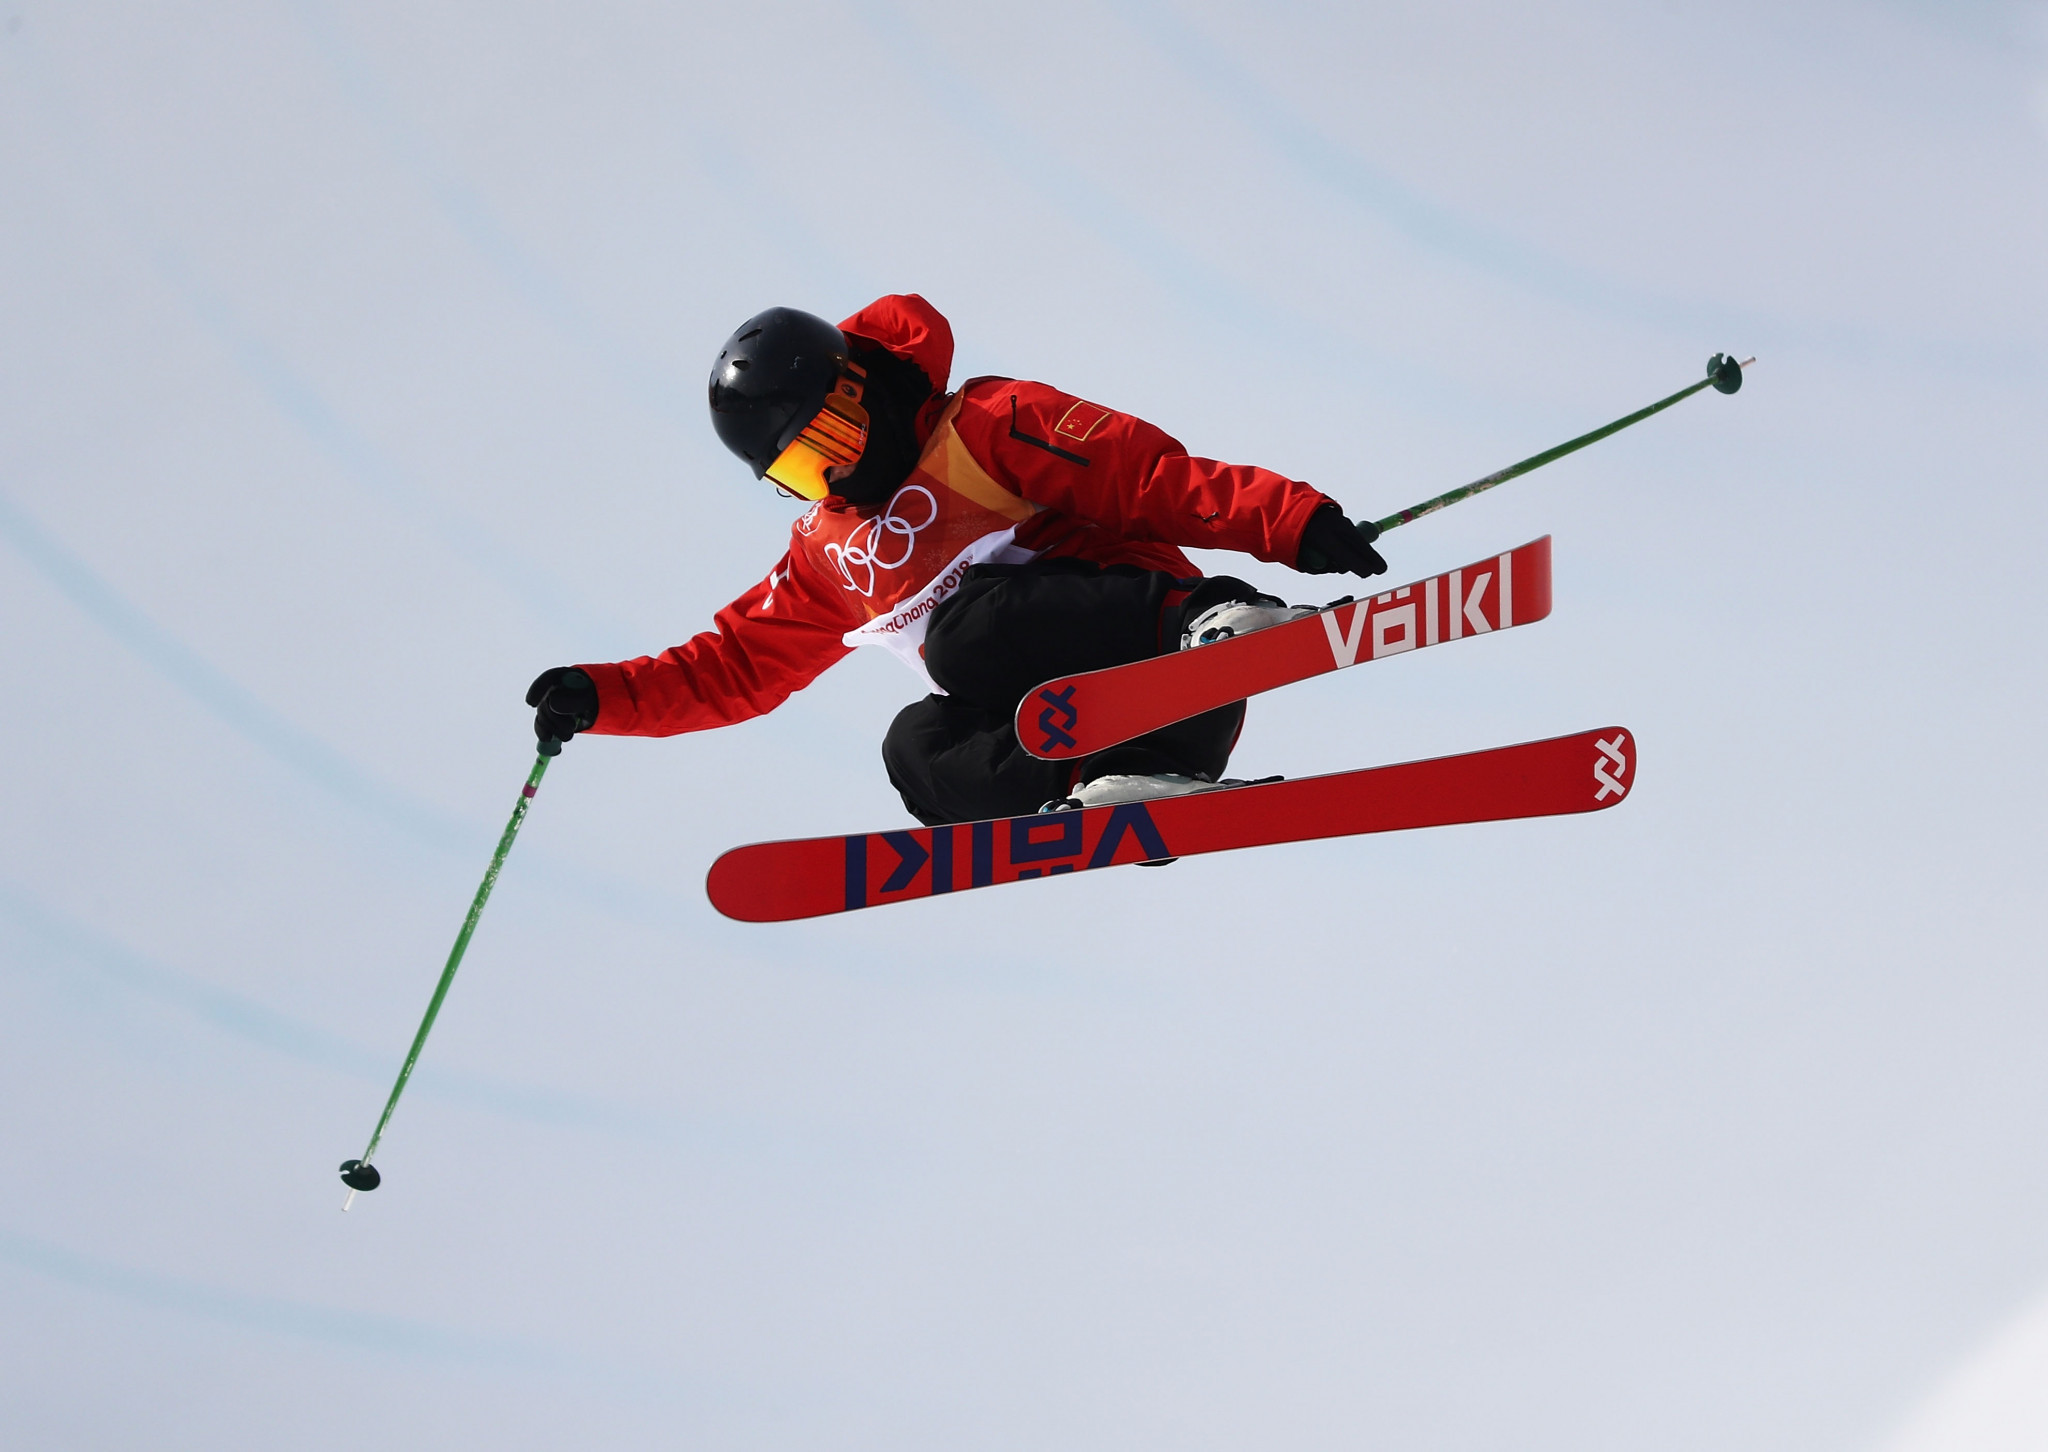 Zhang and d’Artois wrap up 2018 with wins at FIS Freestyle Skiing Halfpipe World Cup